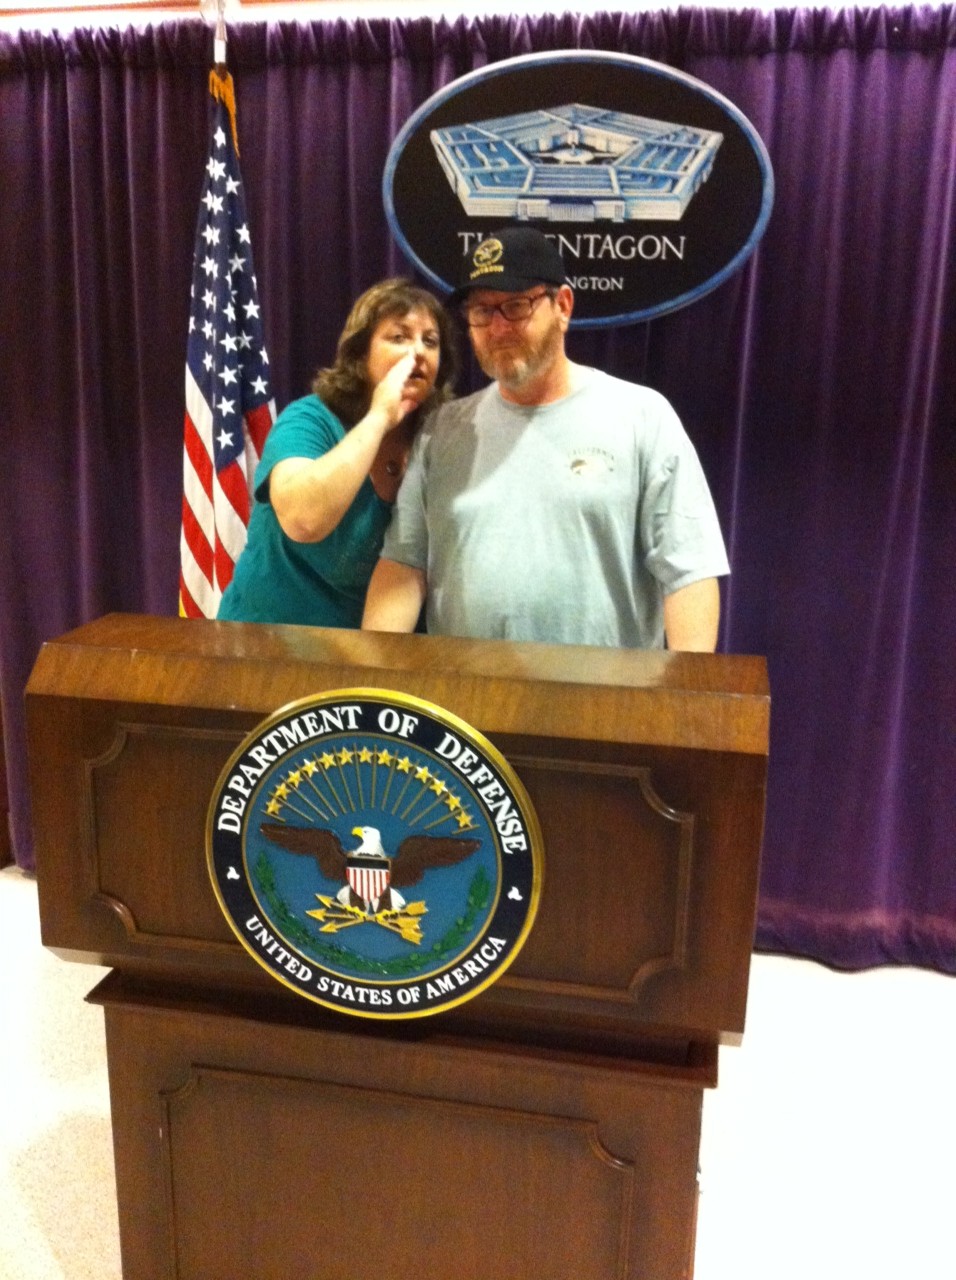 Pictured with Karen Schmauss at the Pentagon Media Briefing area.